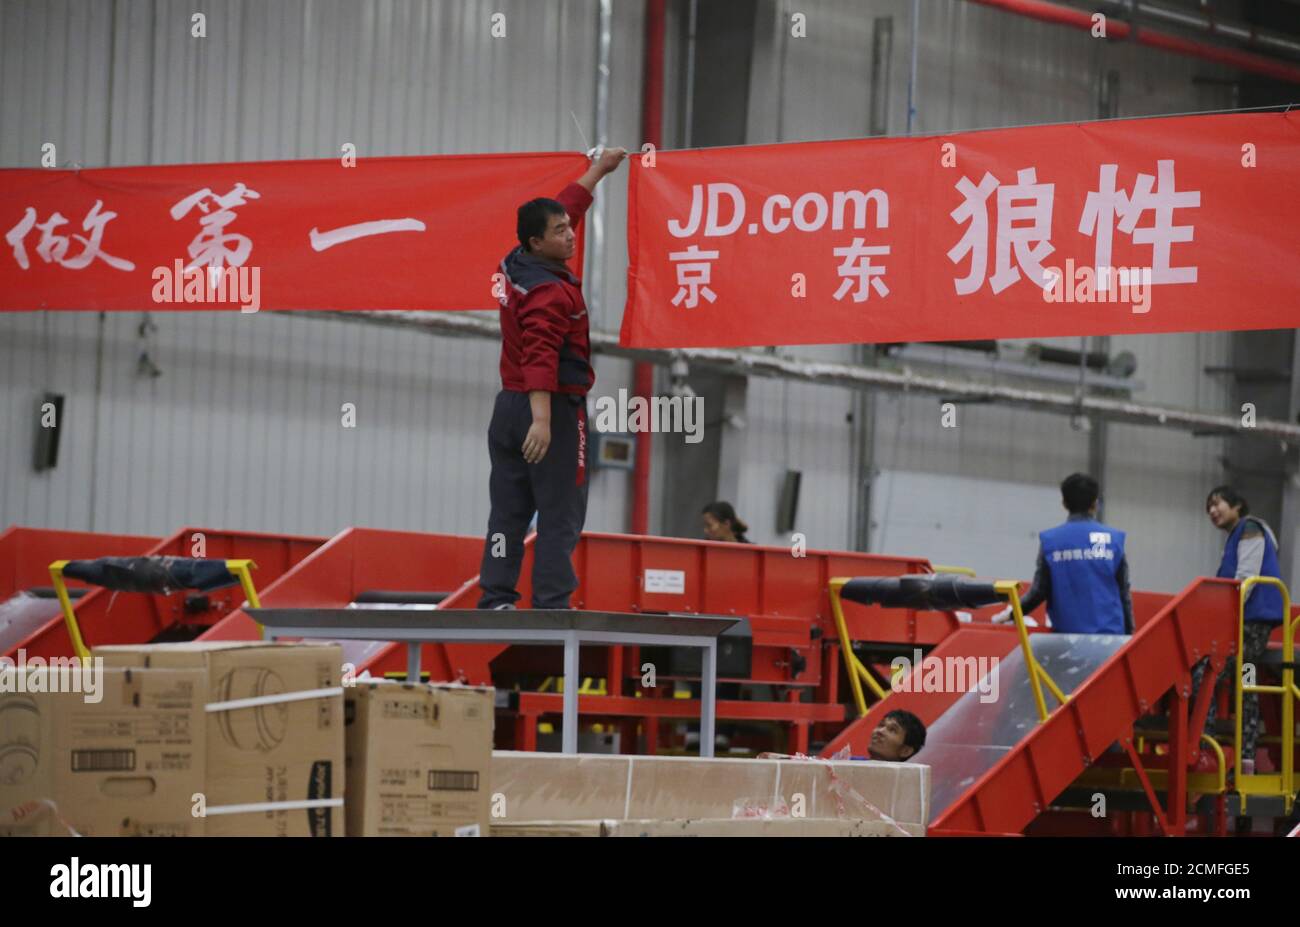 An employee works at a JD.com logistics centre in Langfang, Hebei province, November 10, 2015. REUTERS/Jason Lee/File Photo Stock Photo